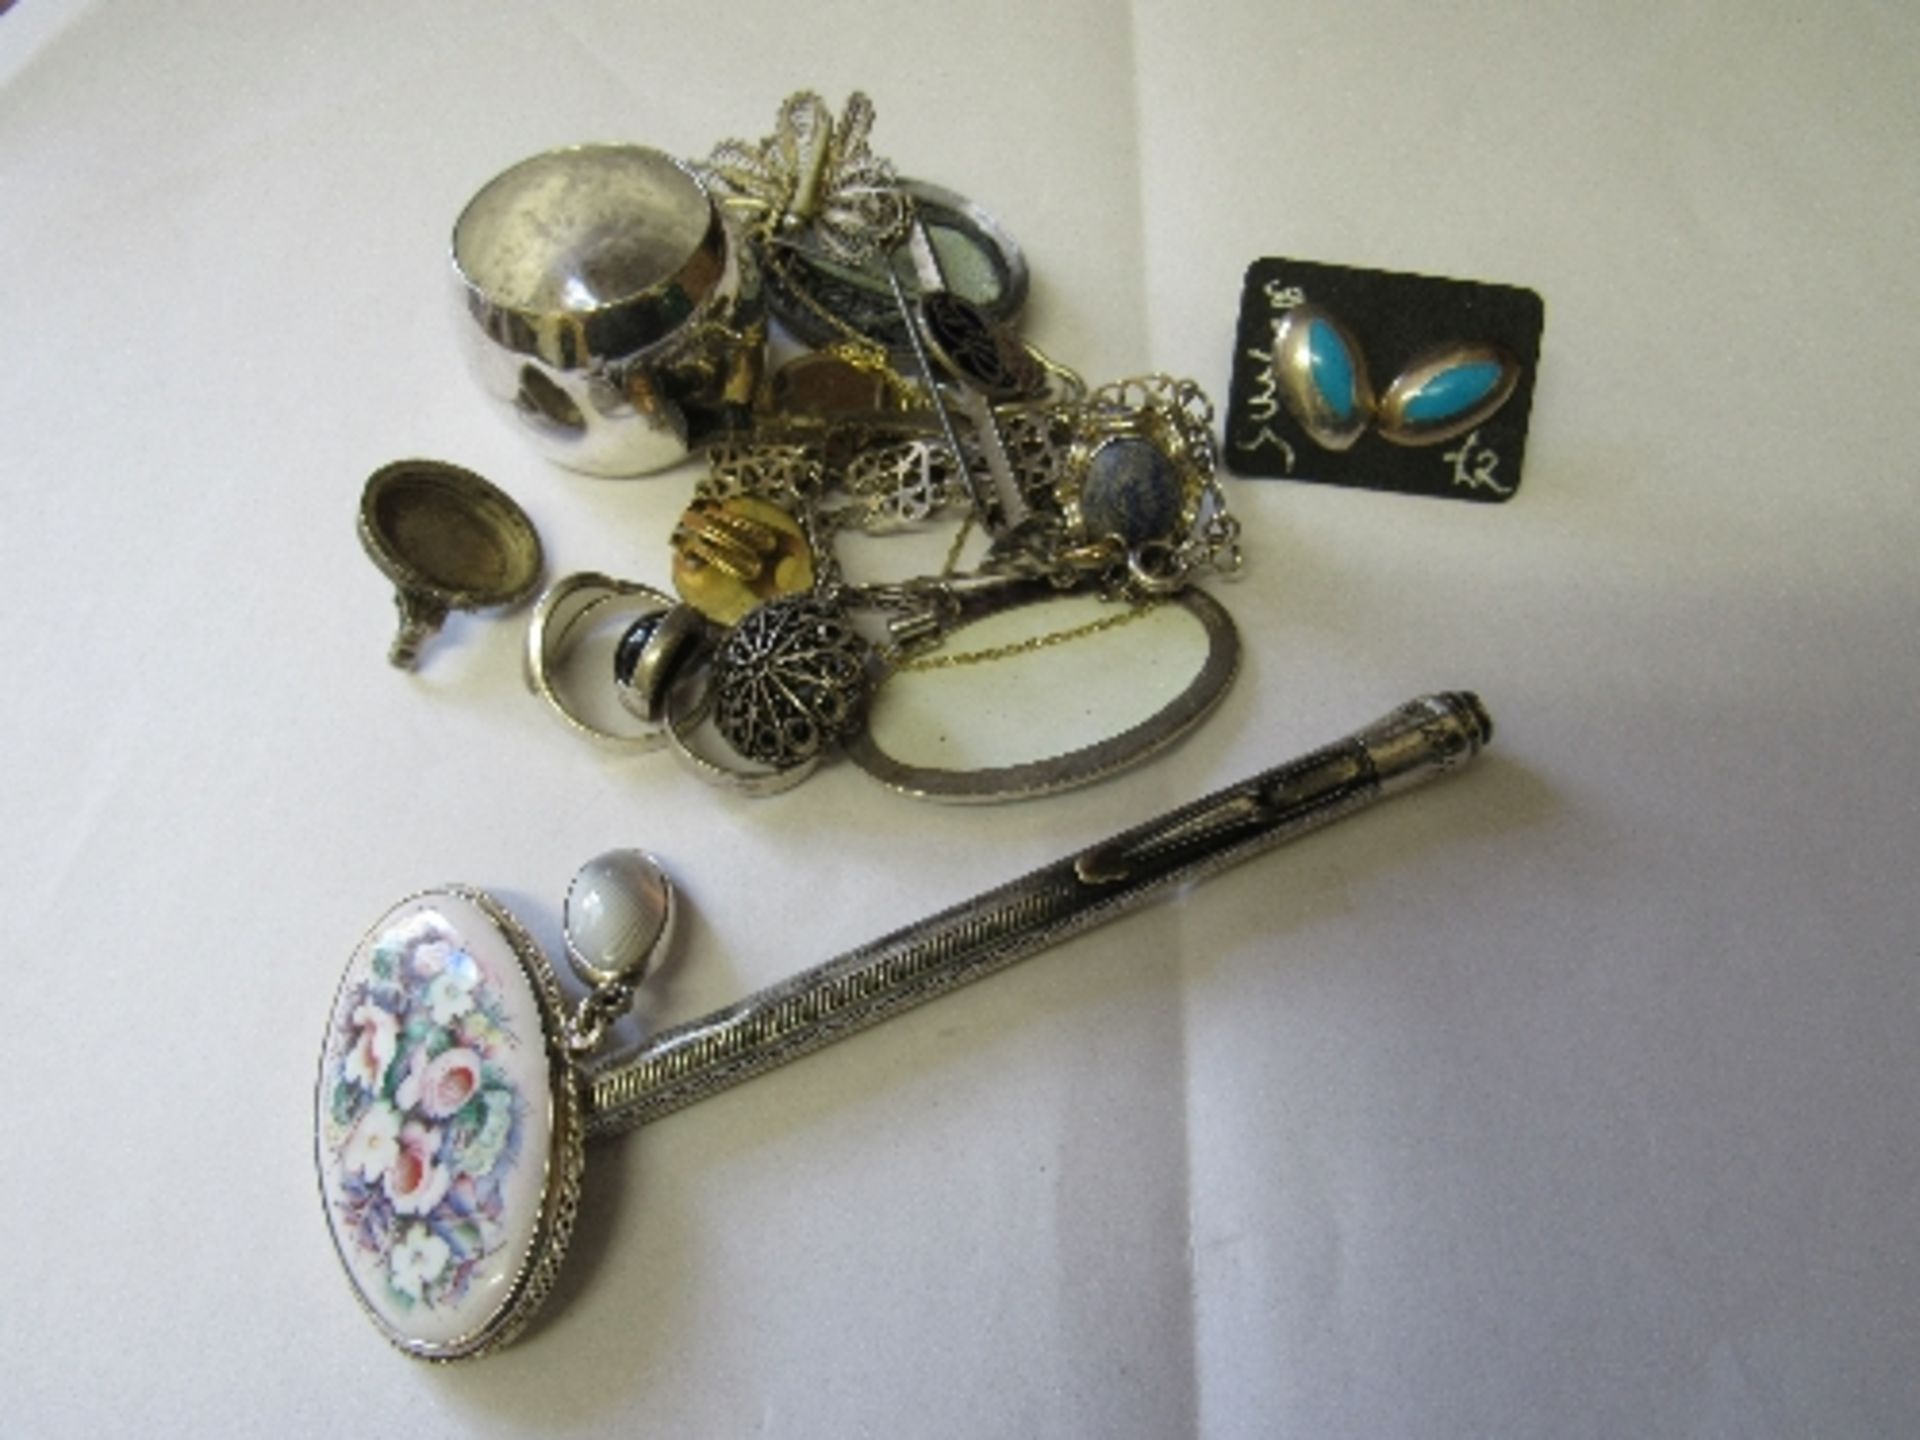 A qty of silver jewellery & other items including a silver pencil. Estimate £20-30.